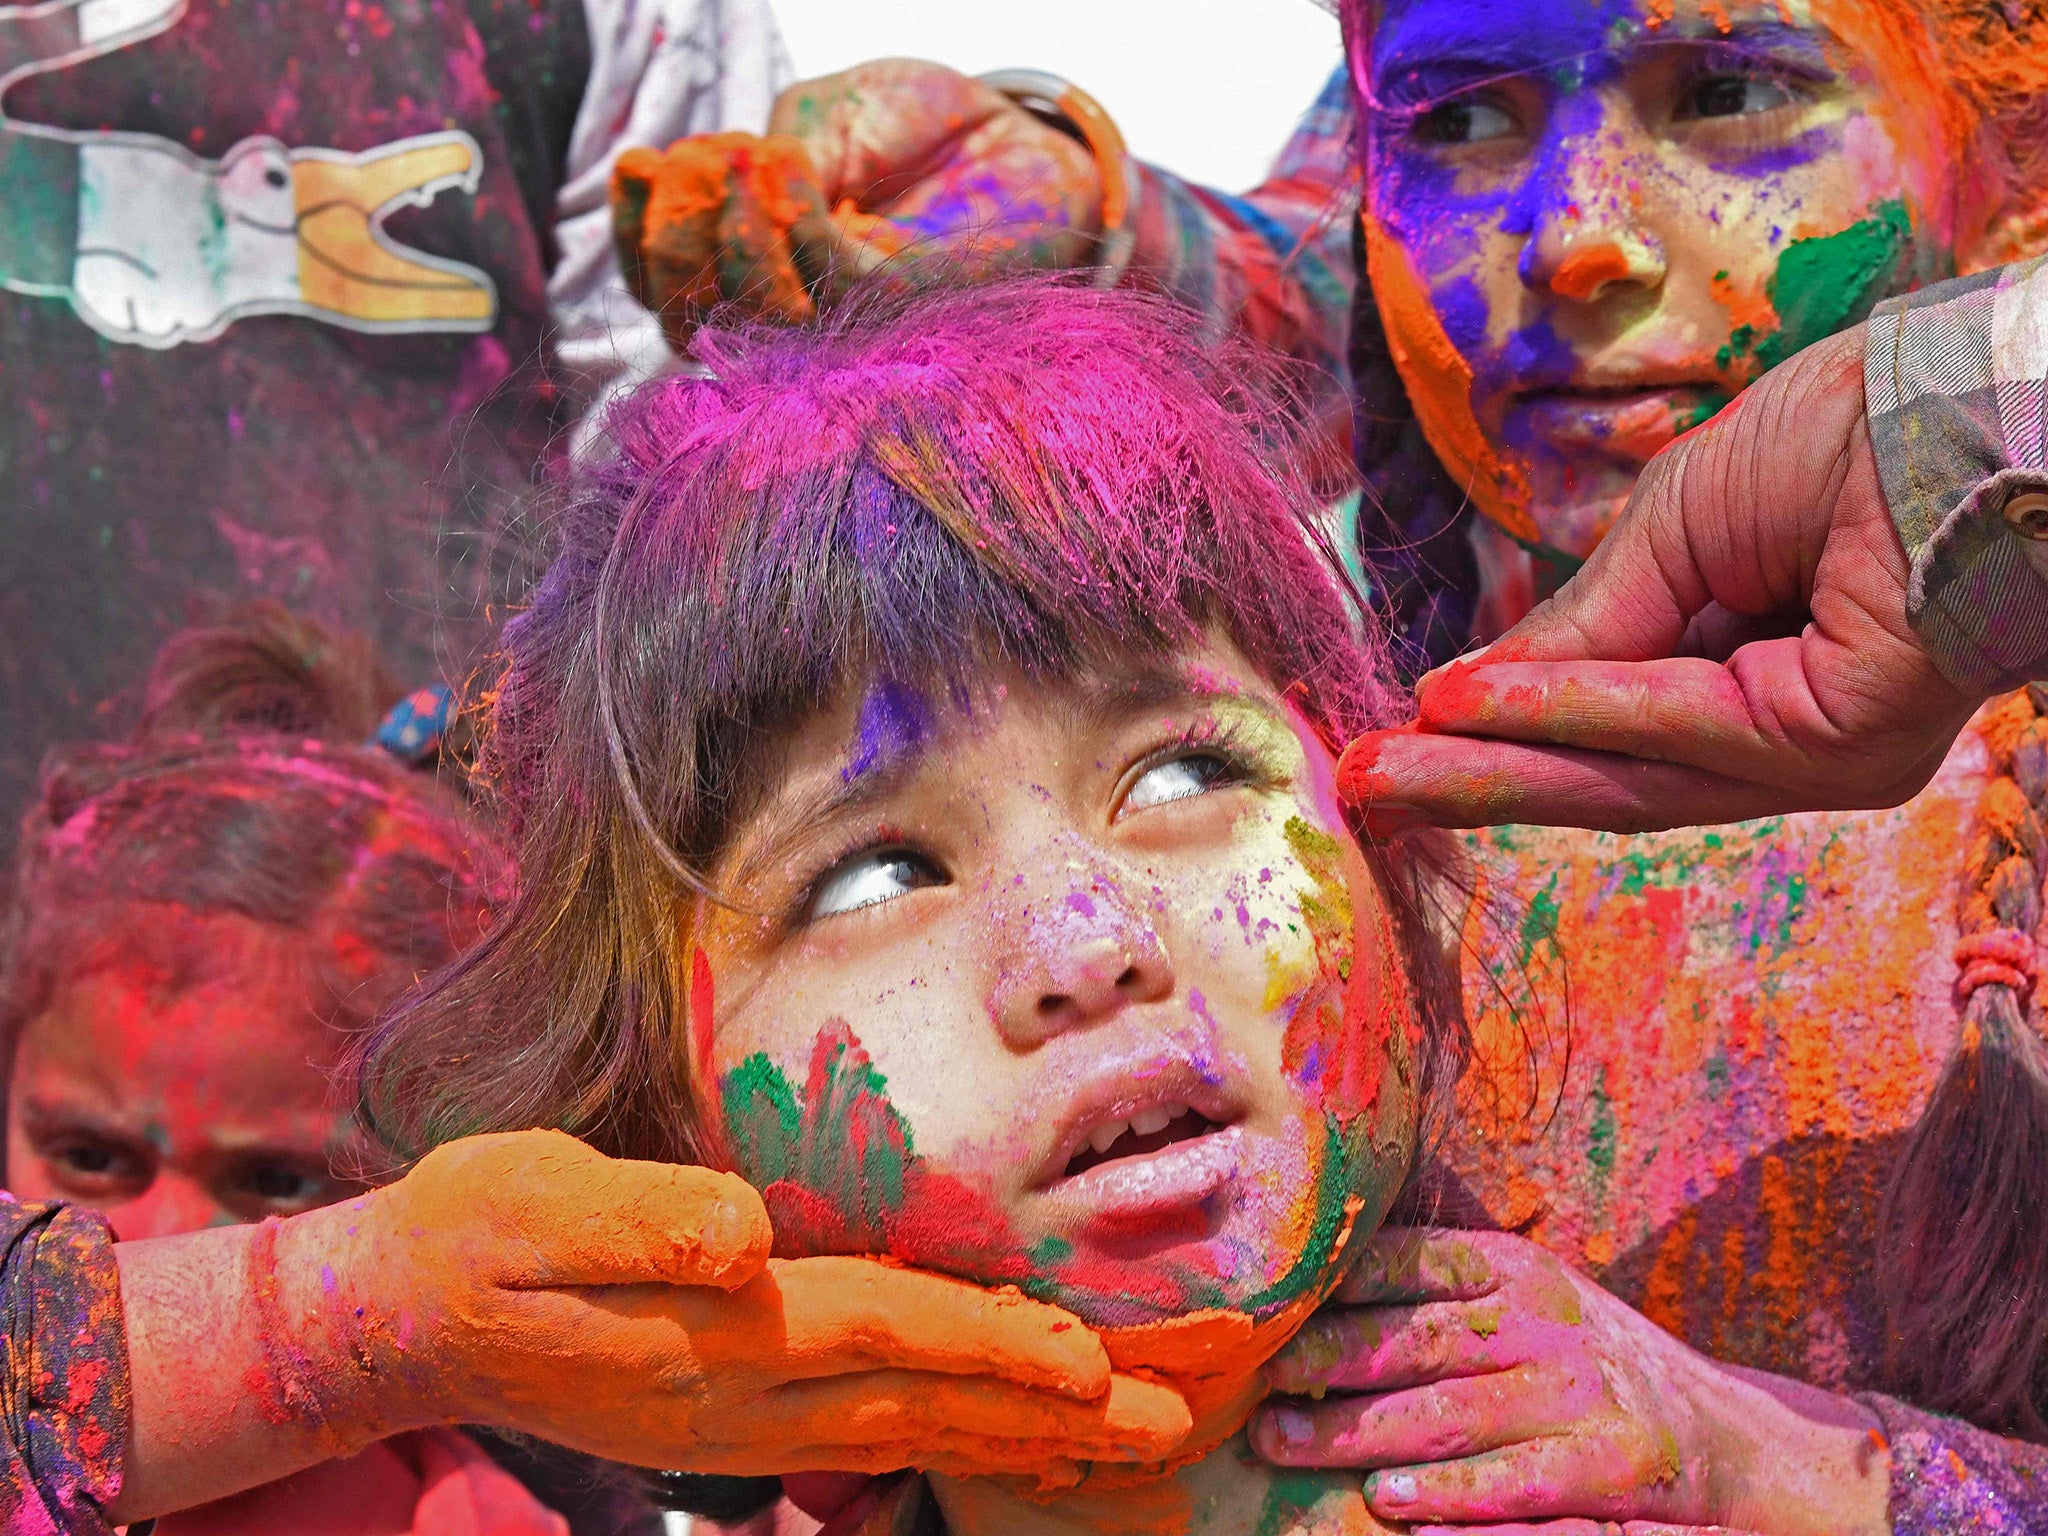 A child is covered in coloured powder during Holi celebrations in Amritsar